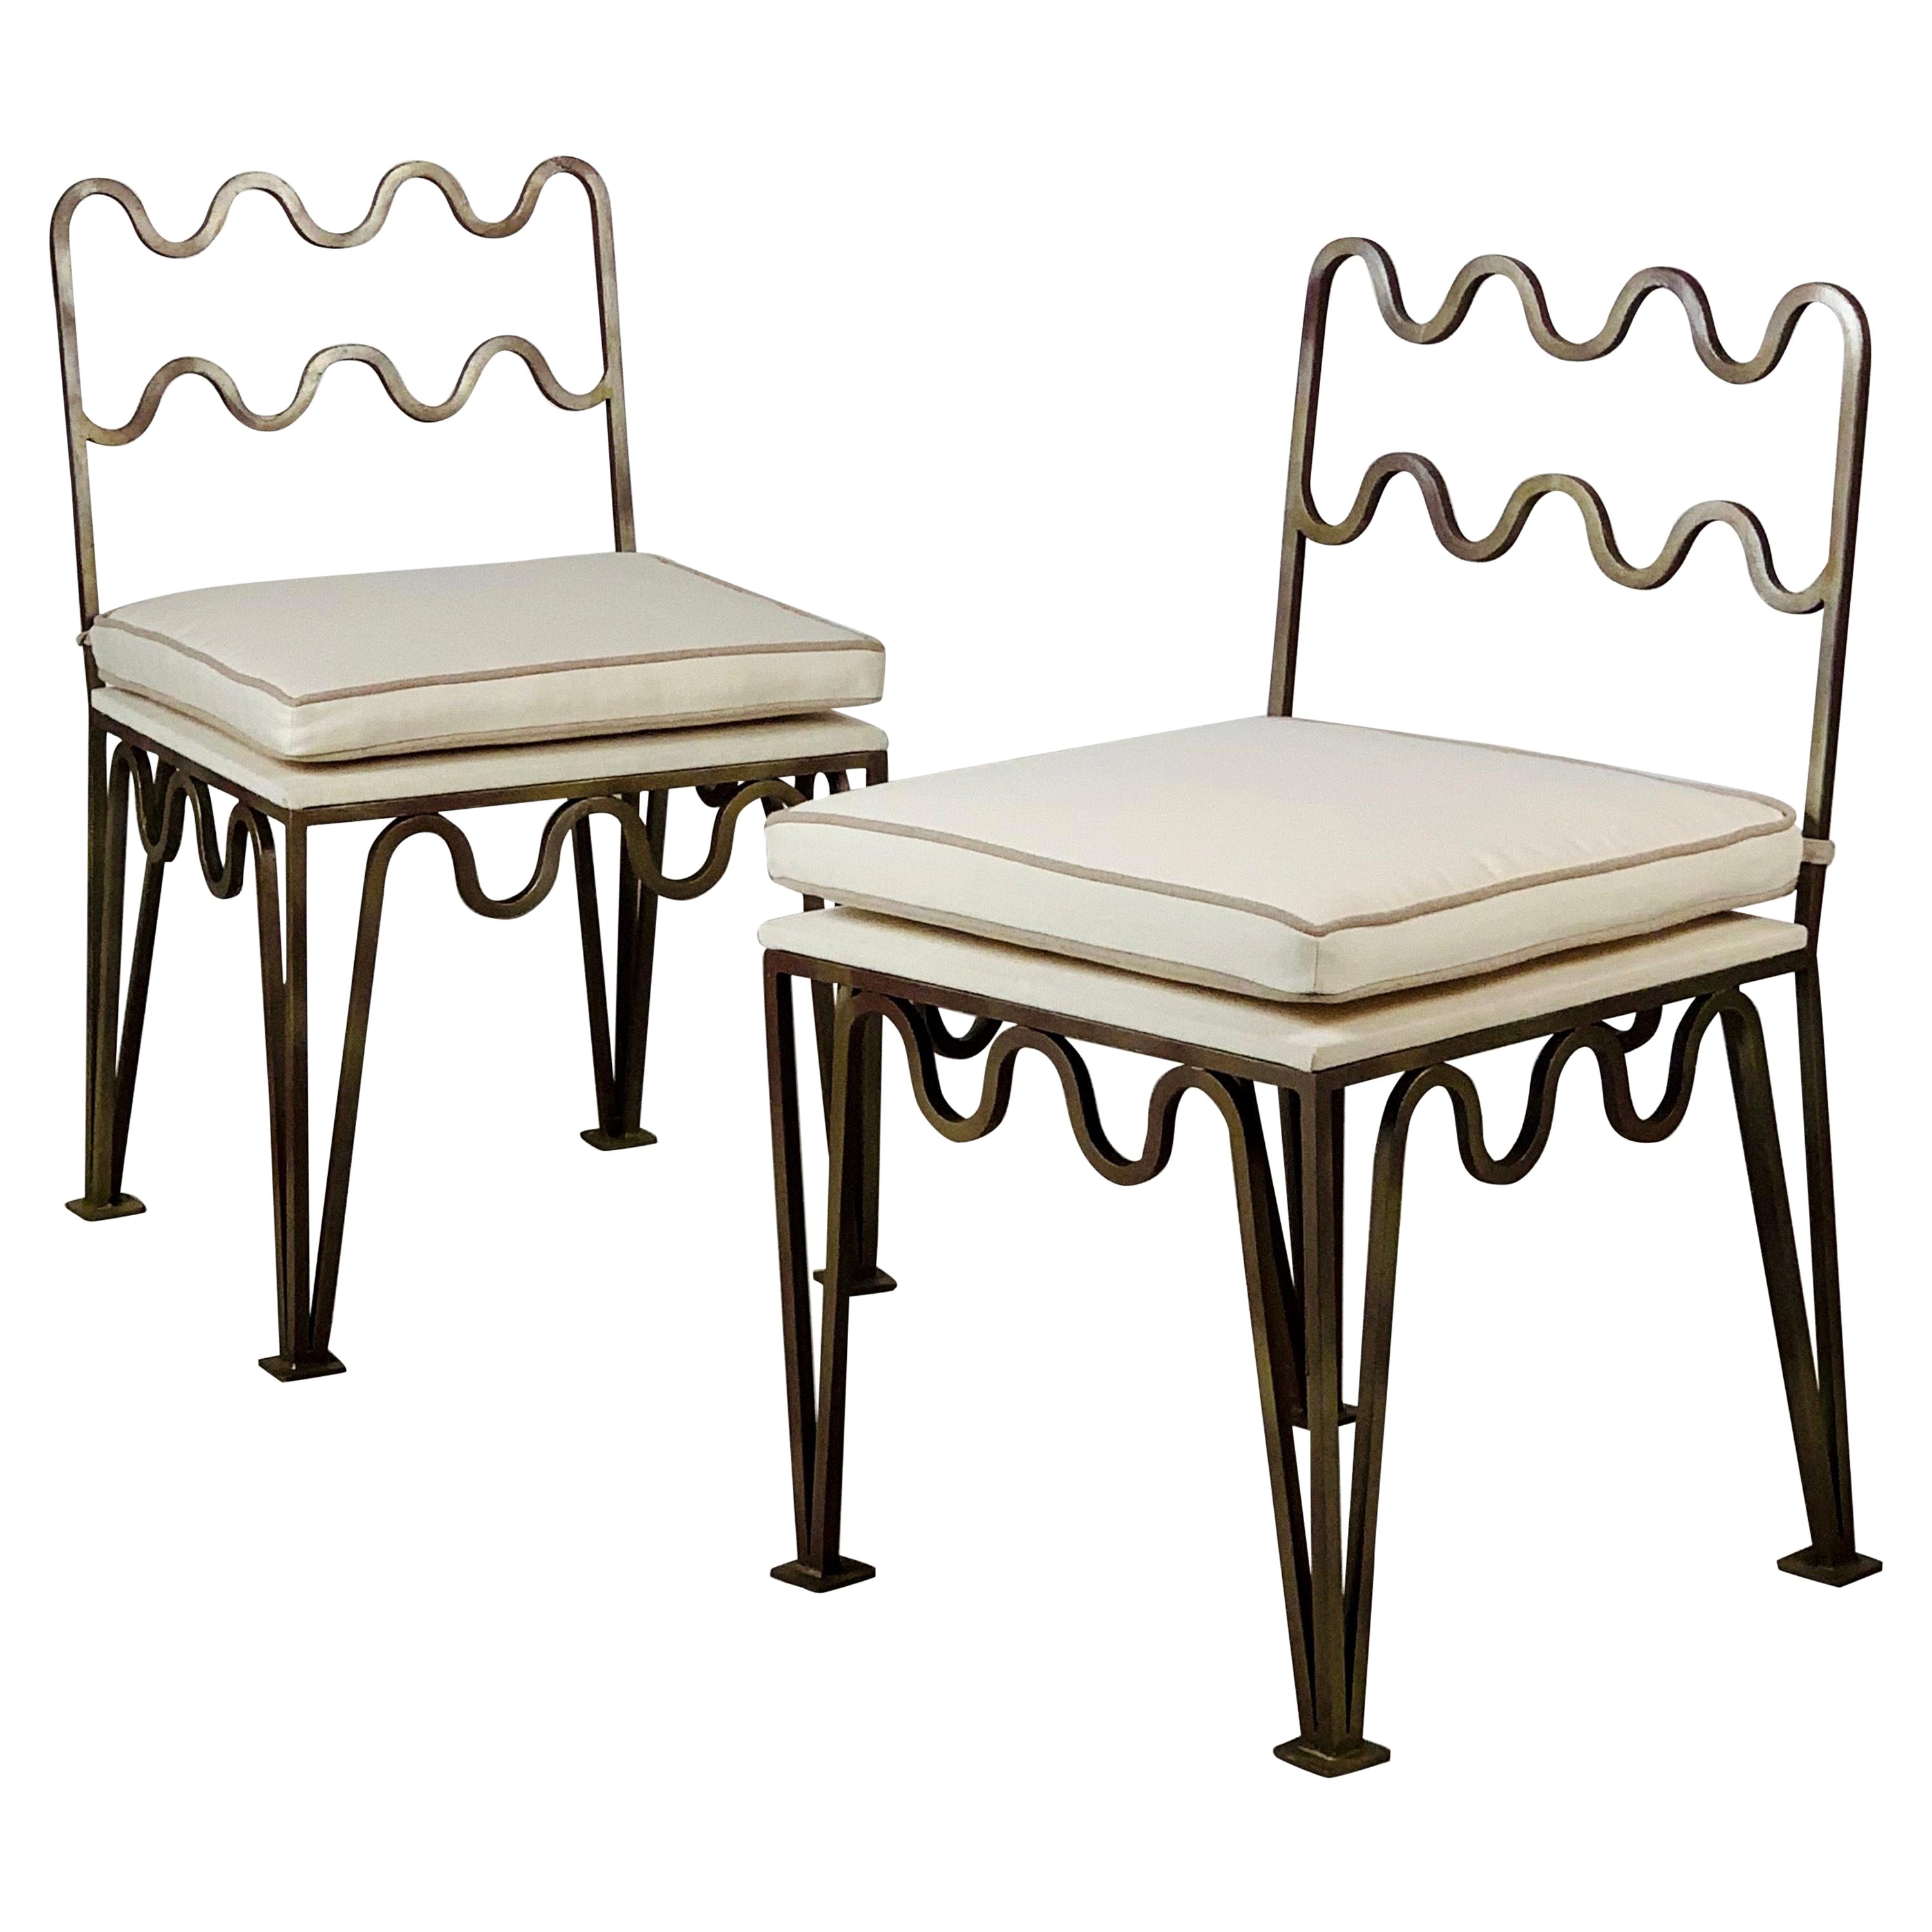 Pair of Chic 'Méandre' Side Chairs by Design Frères For Sale